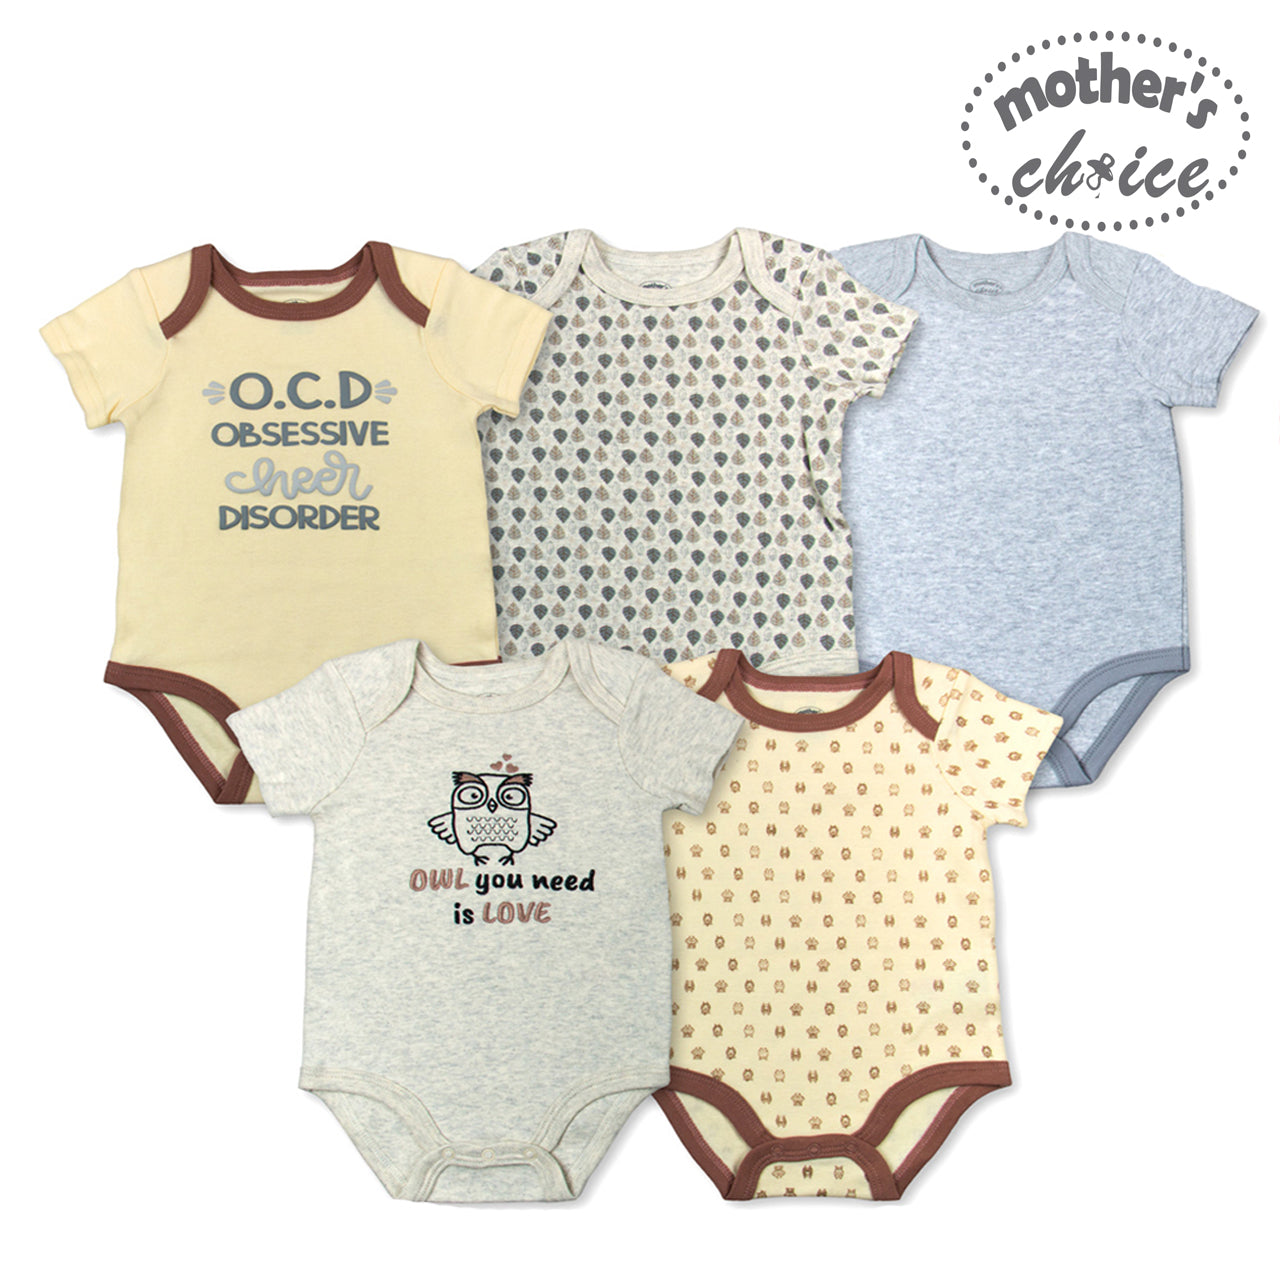 Mother's Choice 5 Pack Short Sleeve Onesie (Owl you need is Love/IT2491)